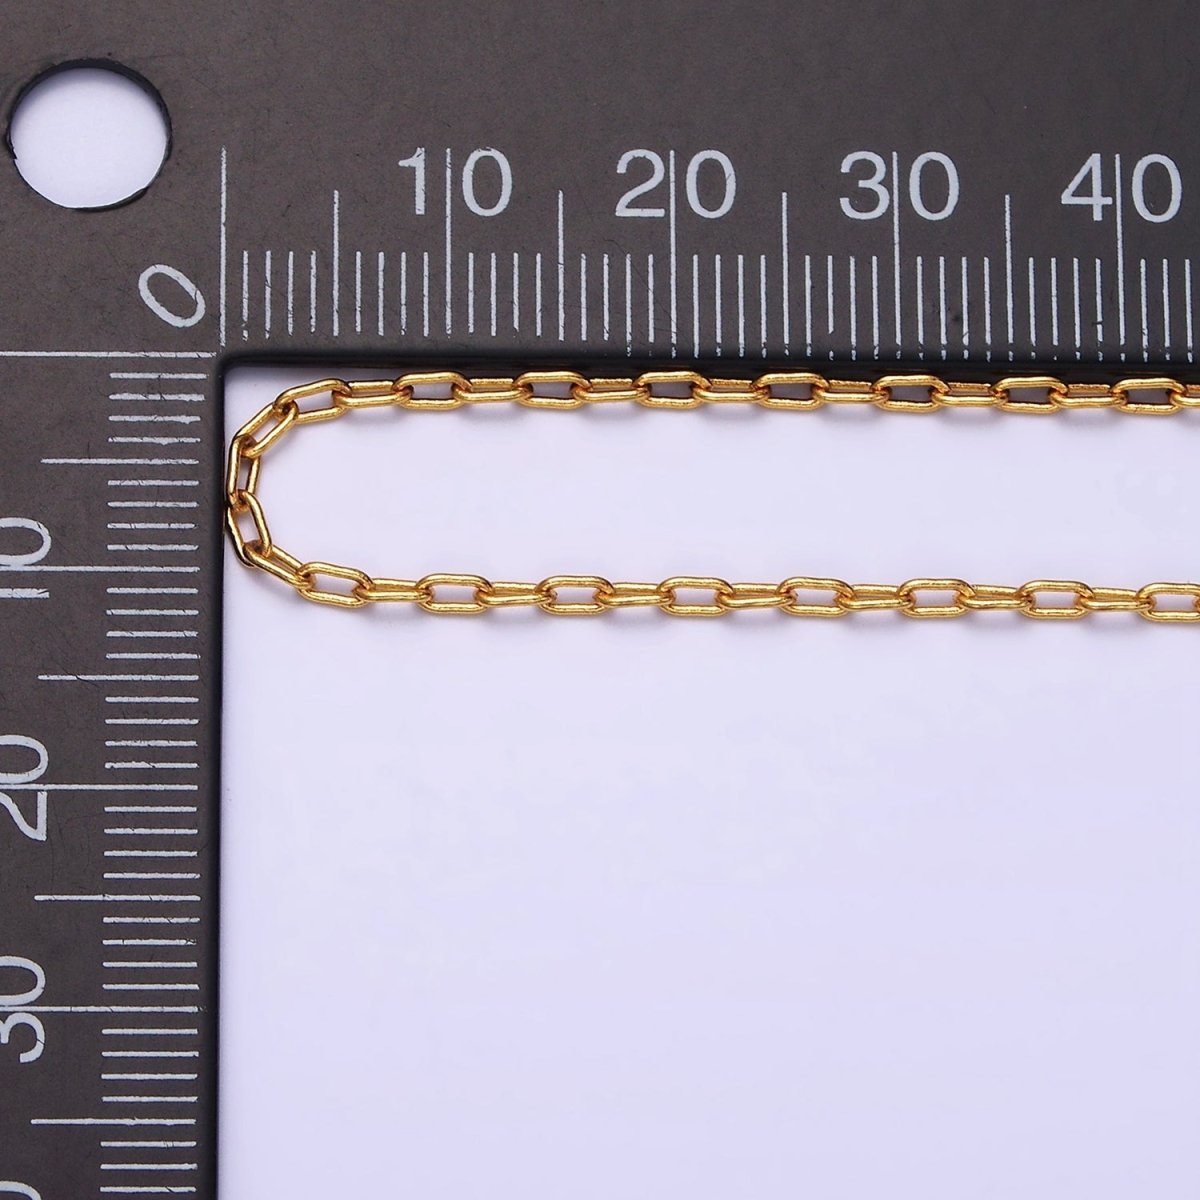 Dainty 1.8mm Cable Paperclip 16 Inch Minimalist Choker Chain Necklace | WA-1873 Clearance Pricing - DLUXCA